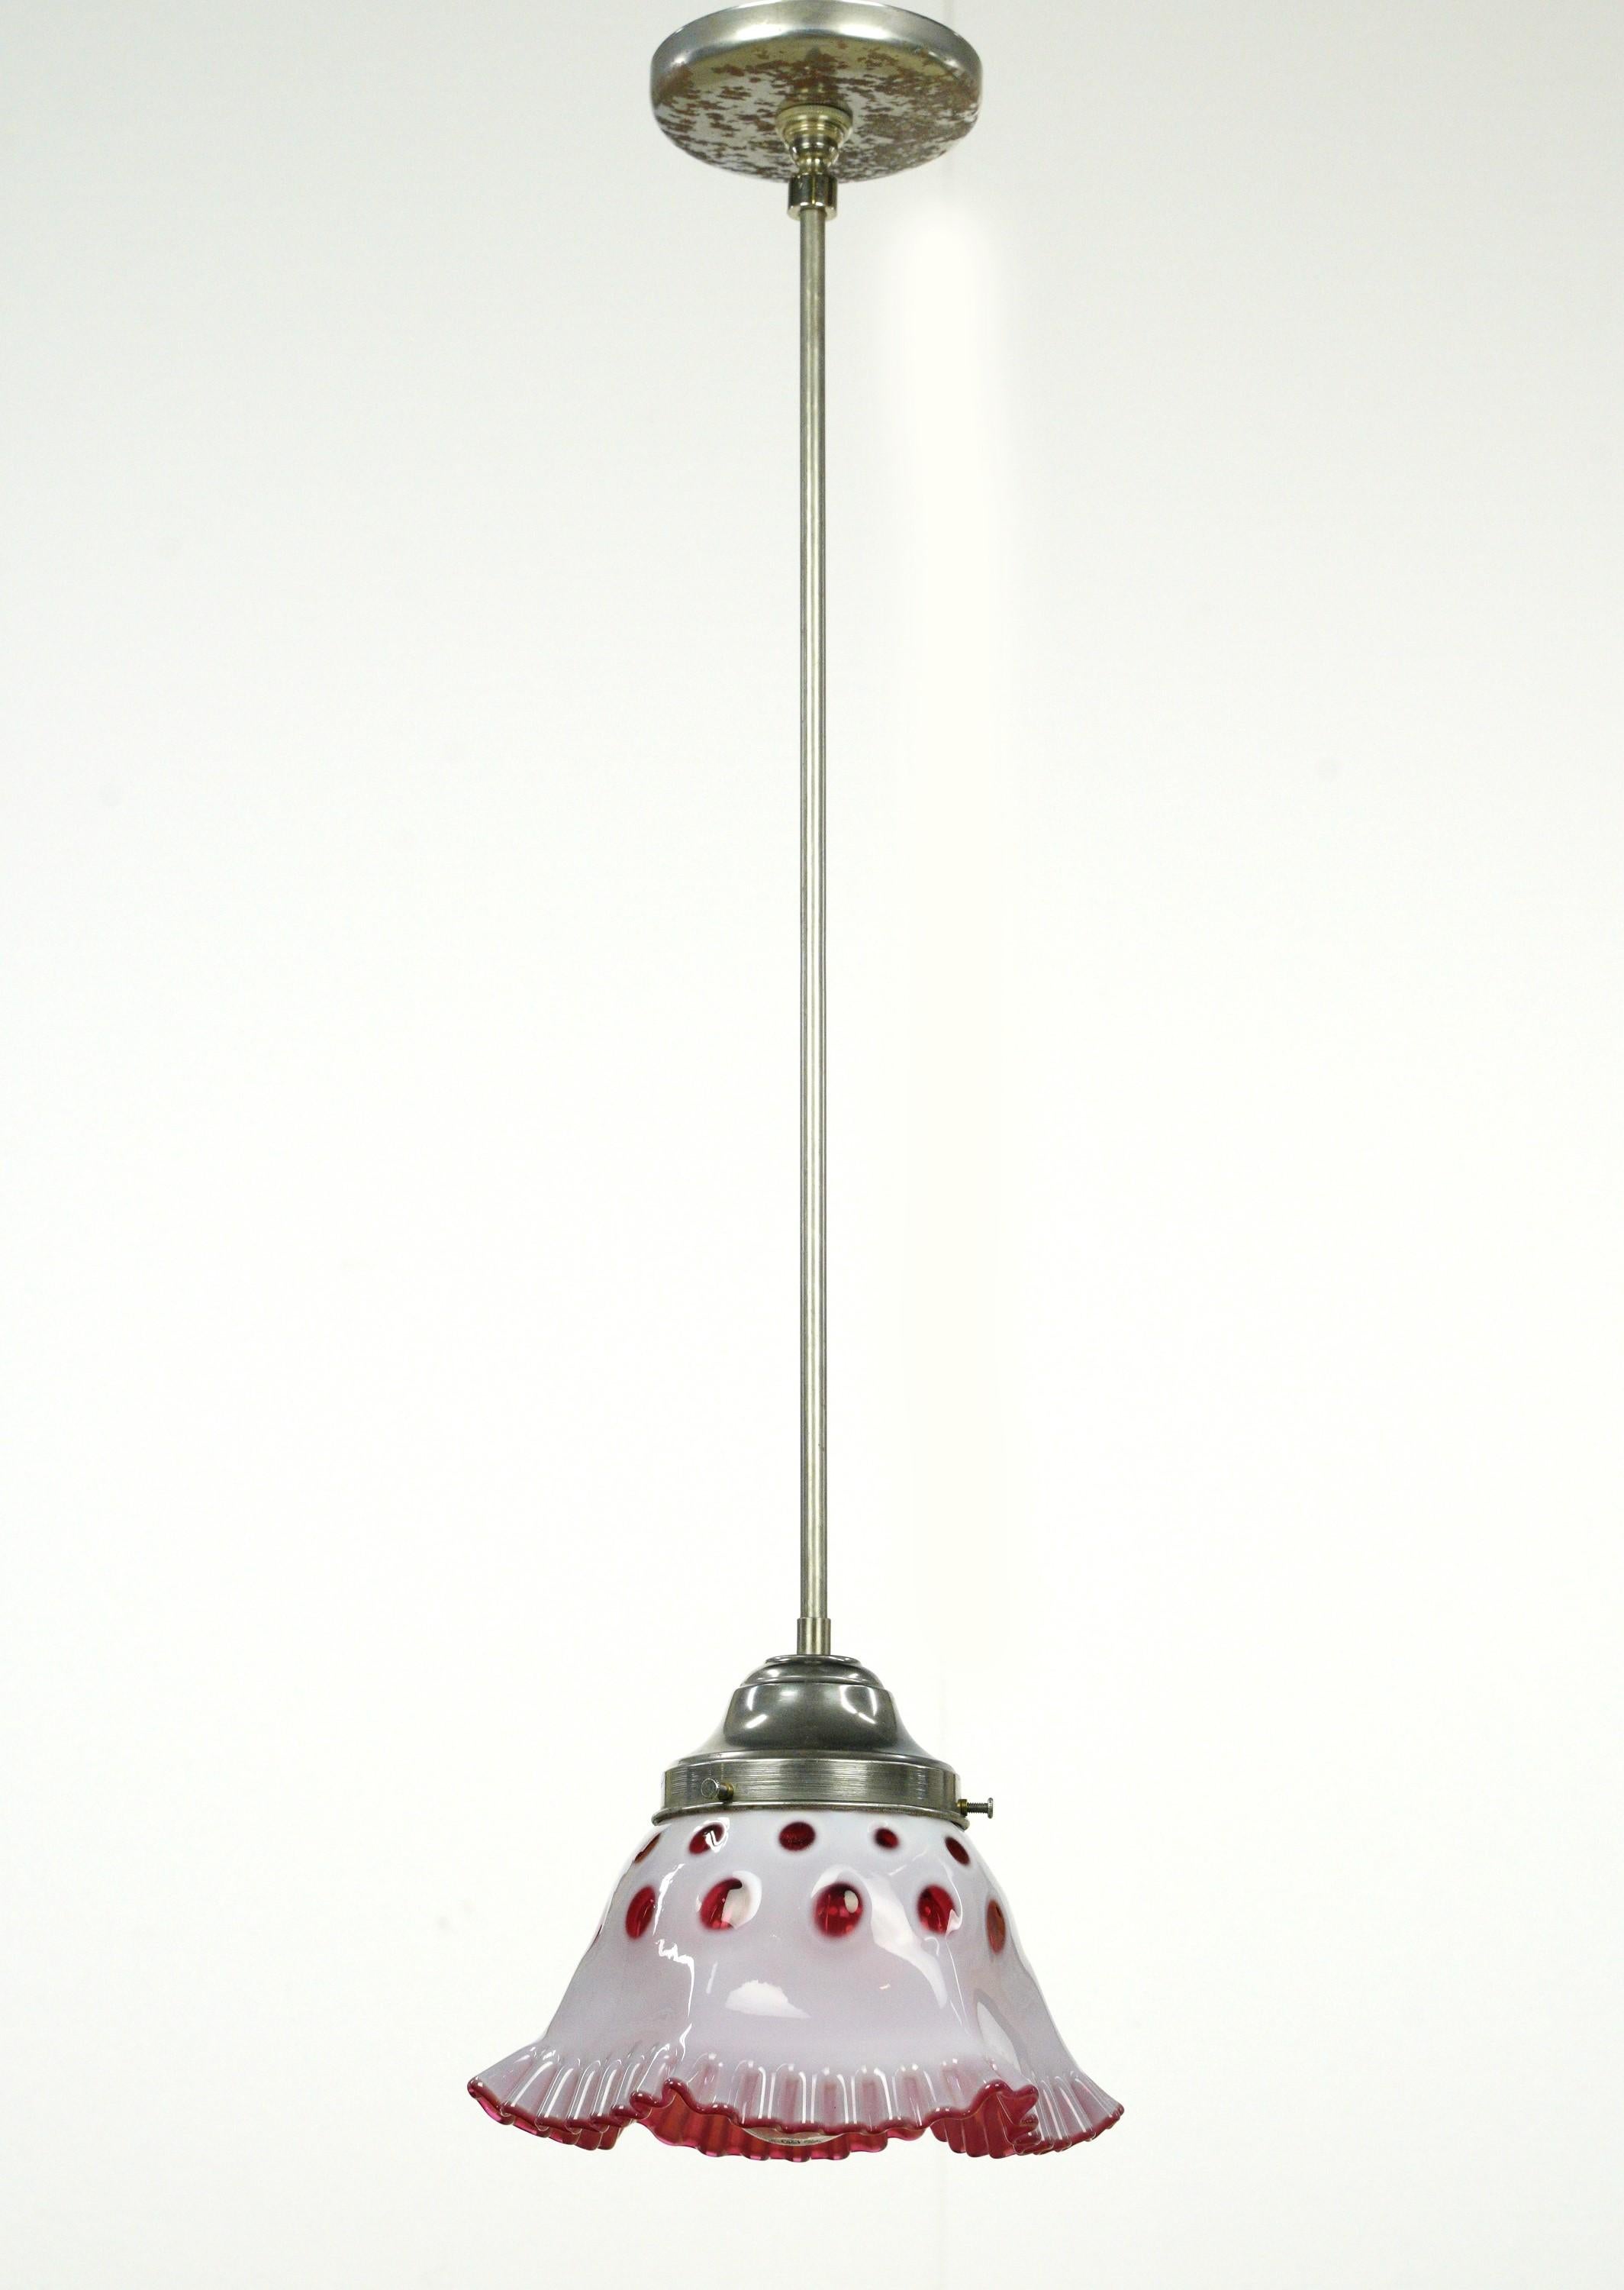 Petite red and white glass pendant light with steel hardware. This requires one standard medium base bulb. The price includes restoration of cleaning and rewiring. Comes with original hardware which can be upgraded upon request. Good condition with